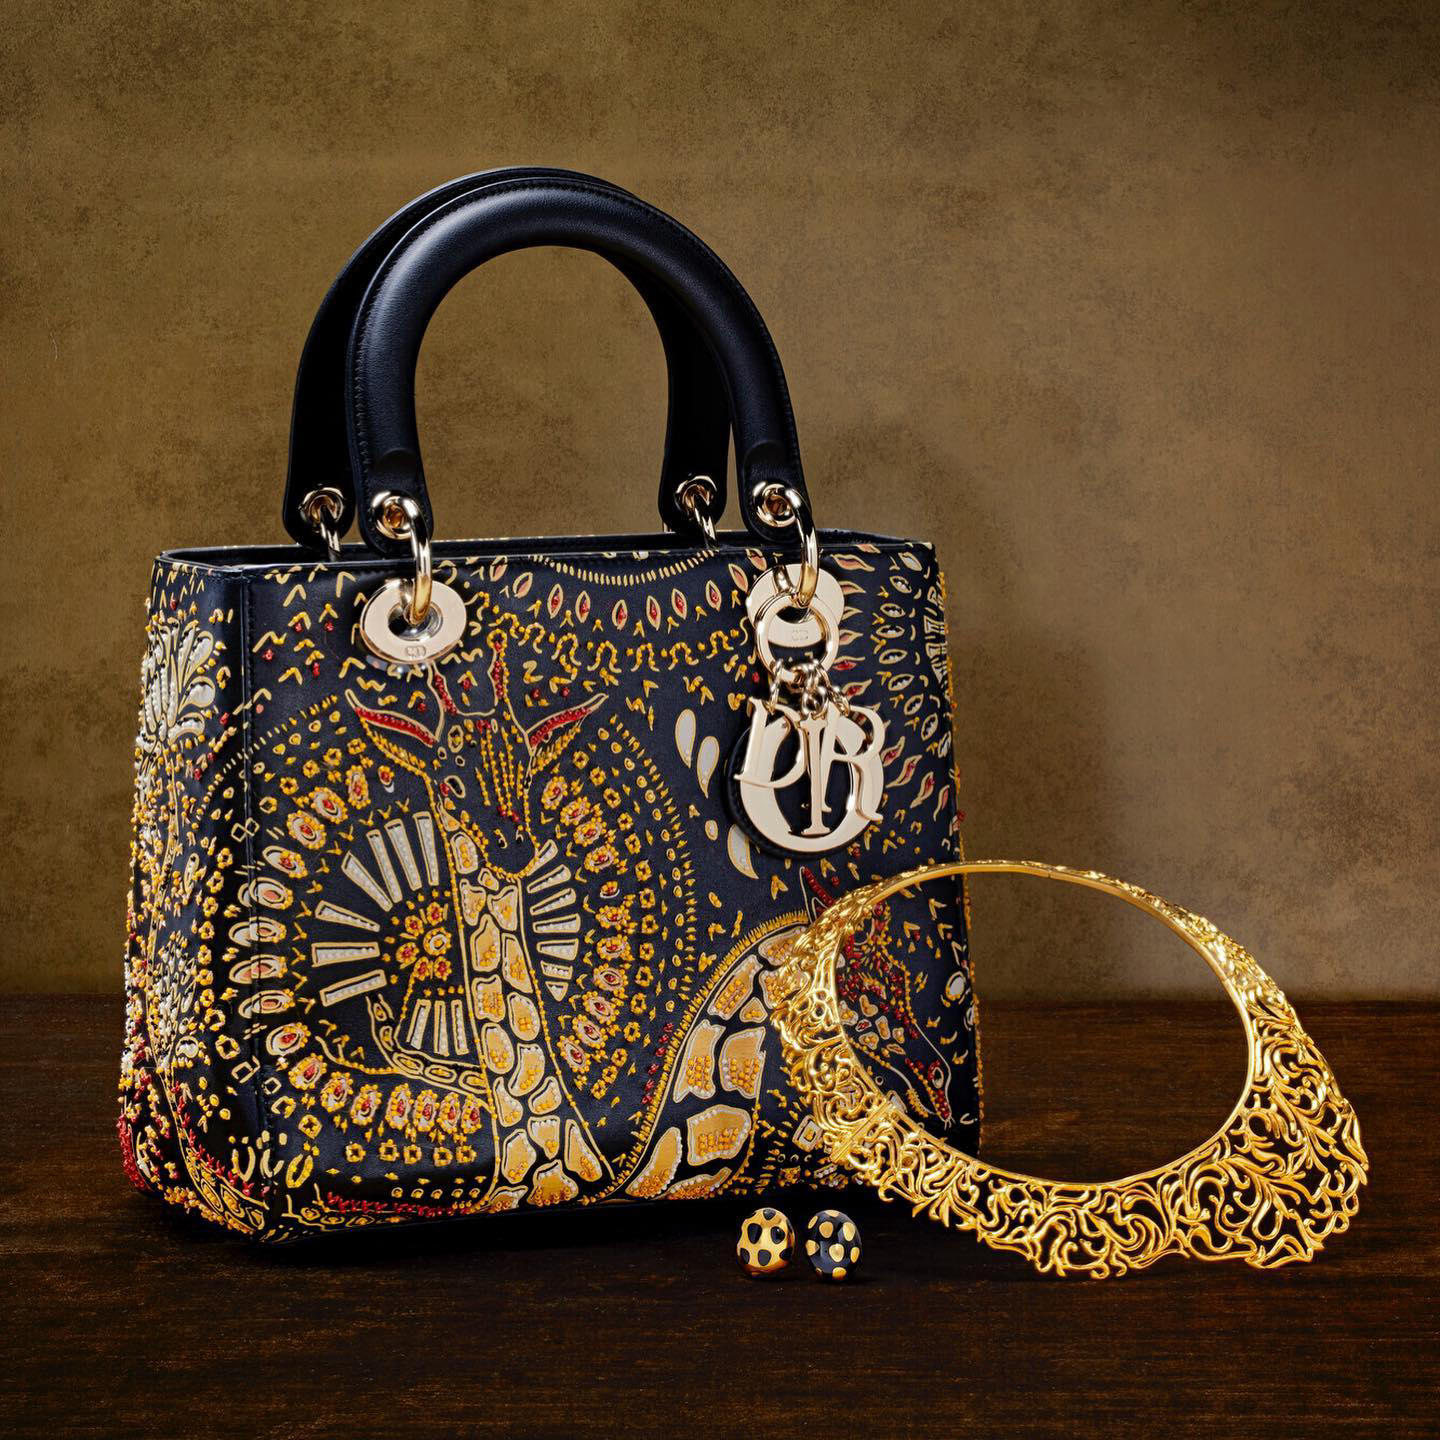 image  1 Christie's Handbags - Christie’s is proud to present “The Ann